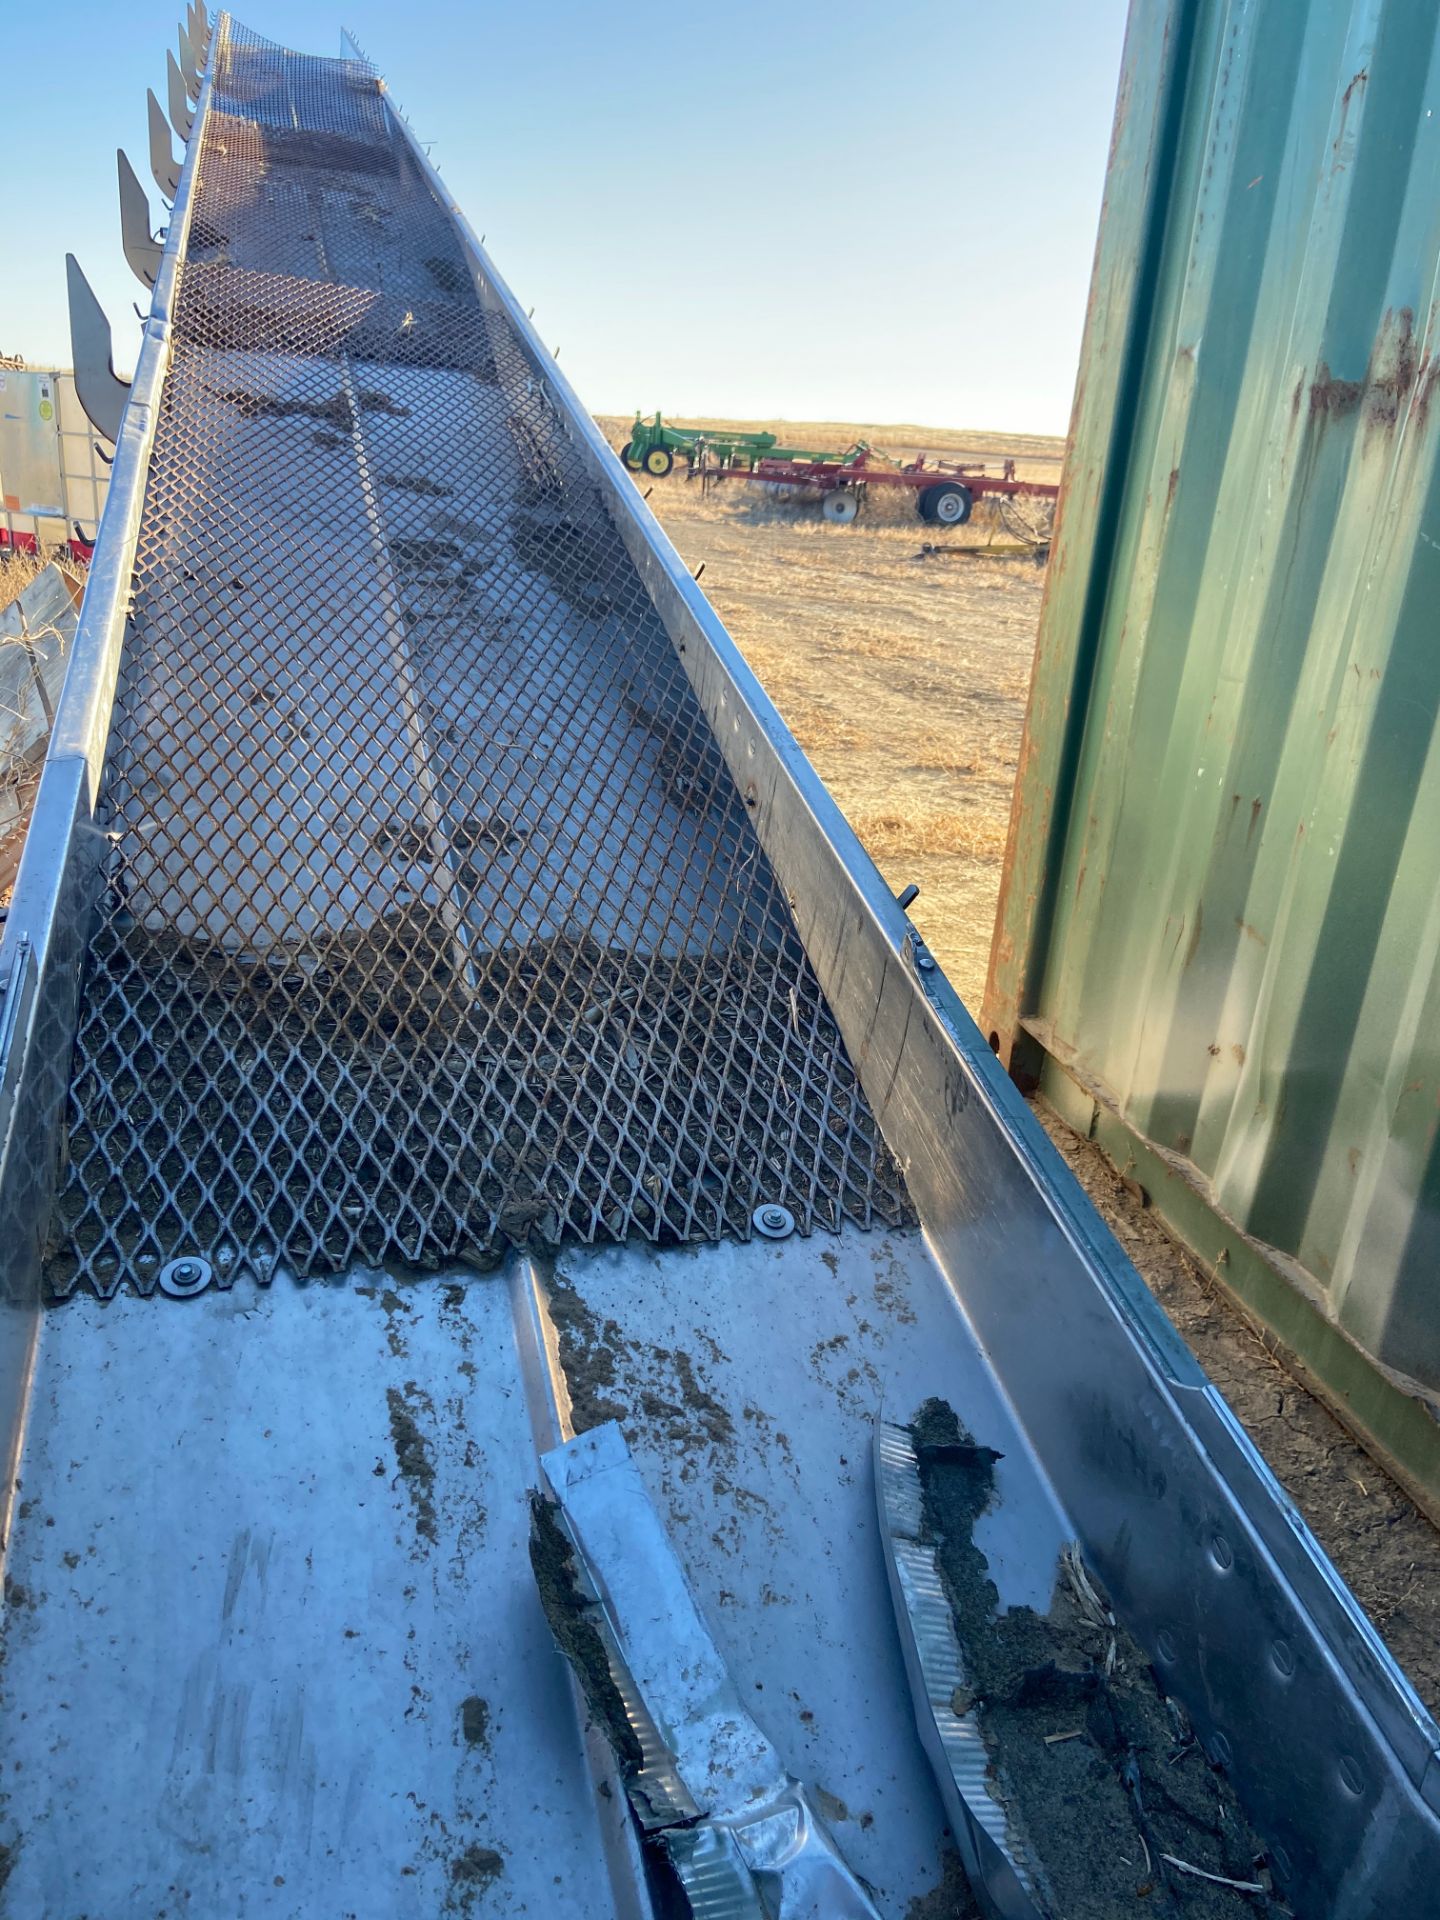 Cardwell Vib-O-Vey Stainless Steel Incline Shaker Conveyor, 24" Wide x 32' Long x 10" Deep, Rigging/ - Image 2 of 3